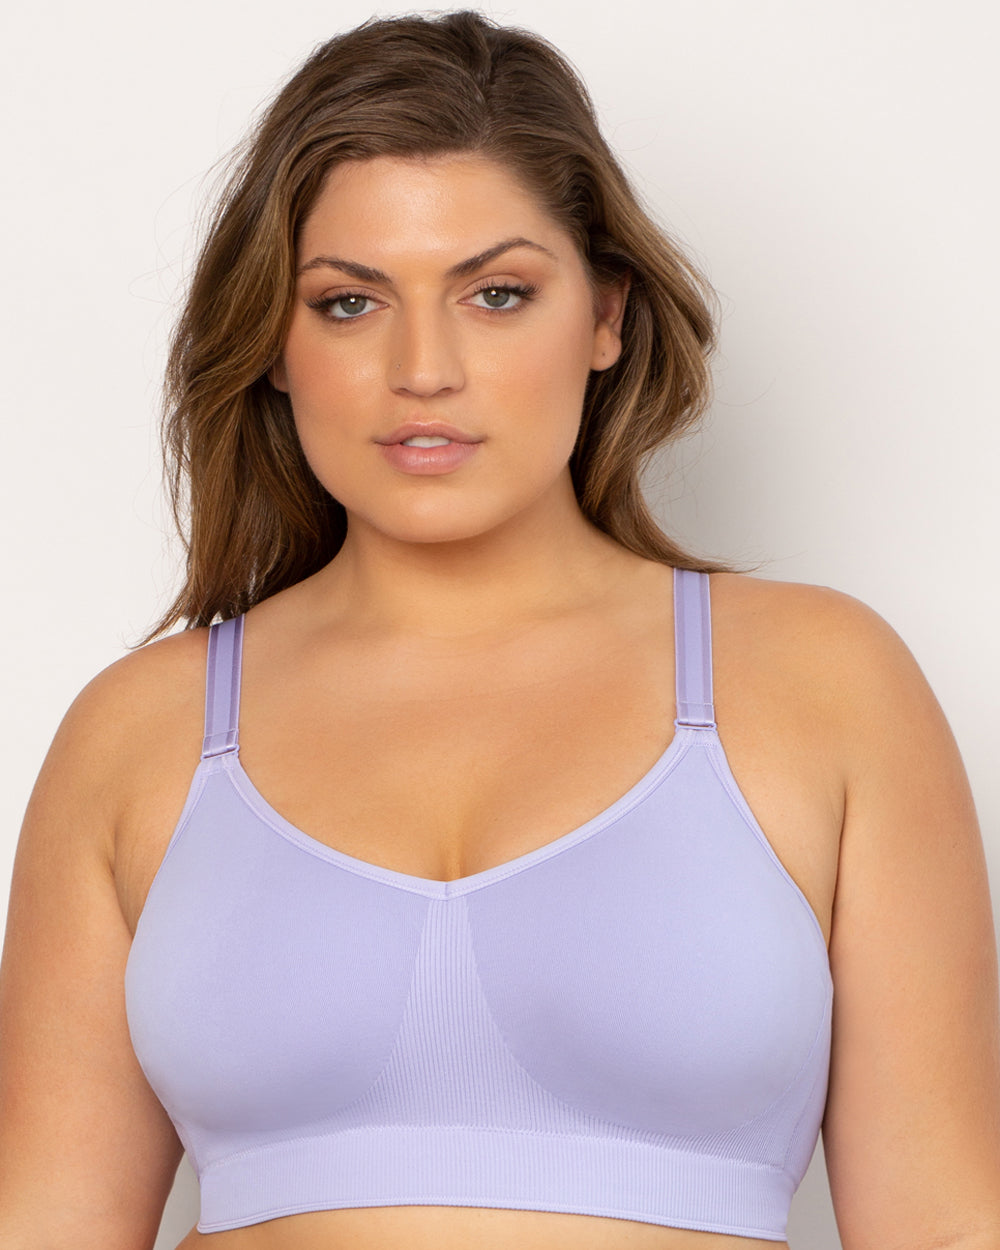 Sweet Curves Scalloped Bra, Sweetsmooth - Scalloped Design Natural Uplift  Bra, Wireless Push up Anti-Saggy Bra (Beige,S) at  Women's Clothing  store